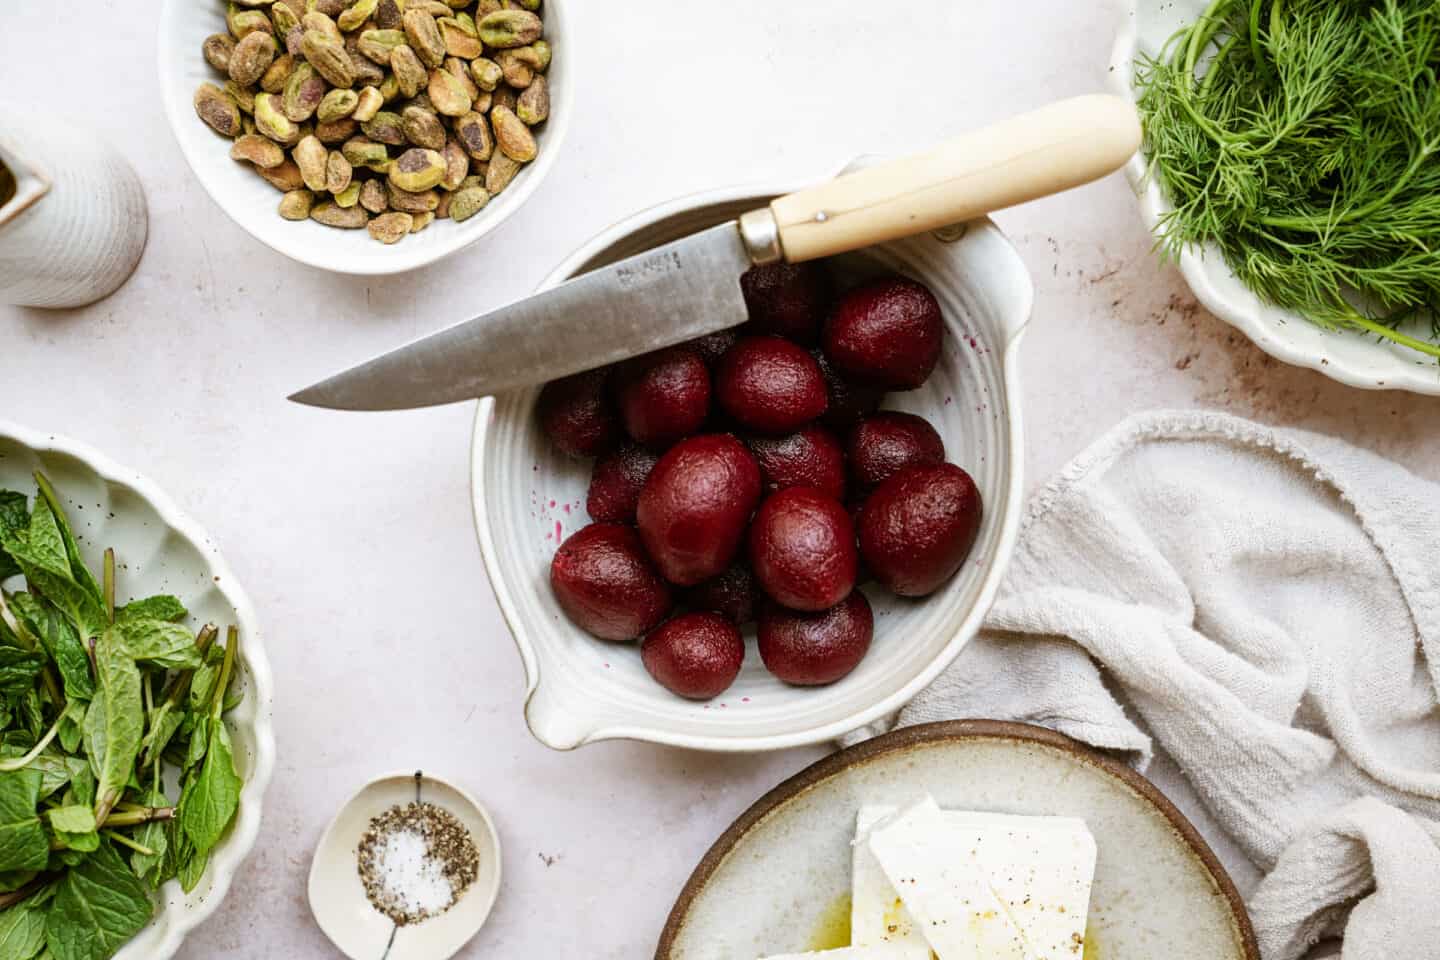 Ingredients for beet salad with feta